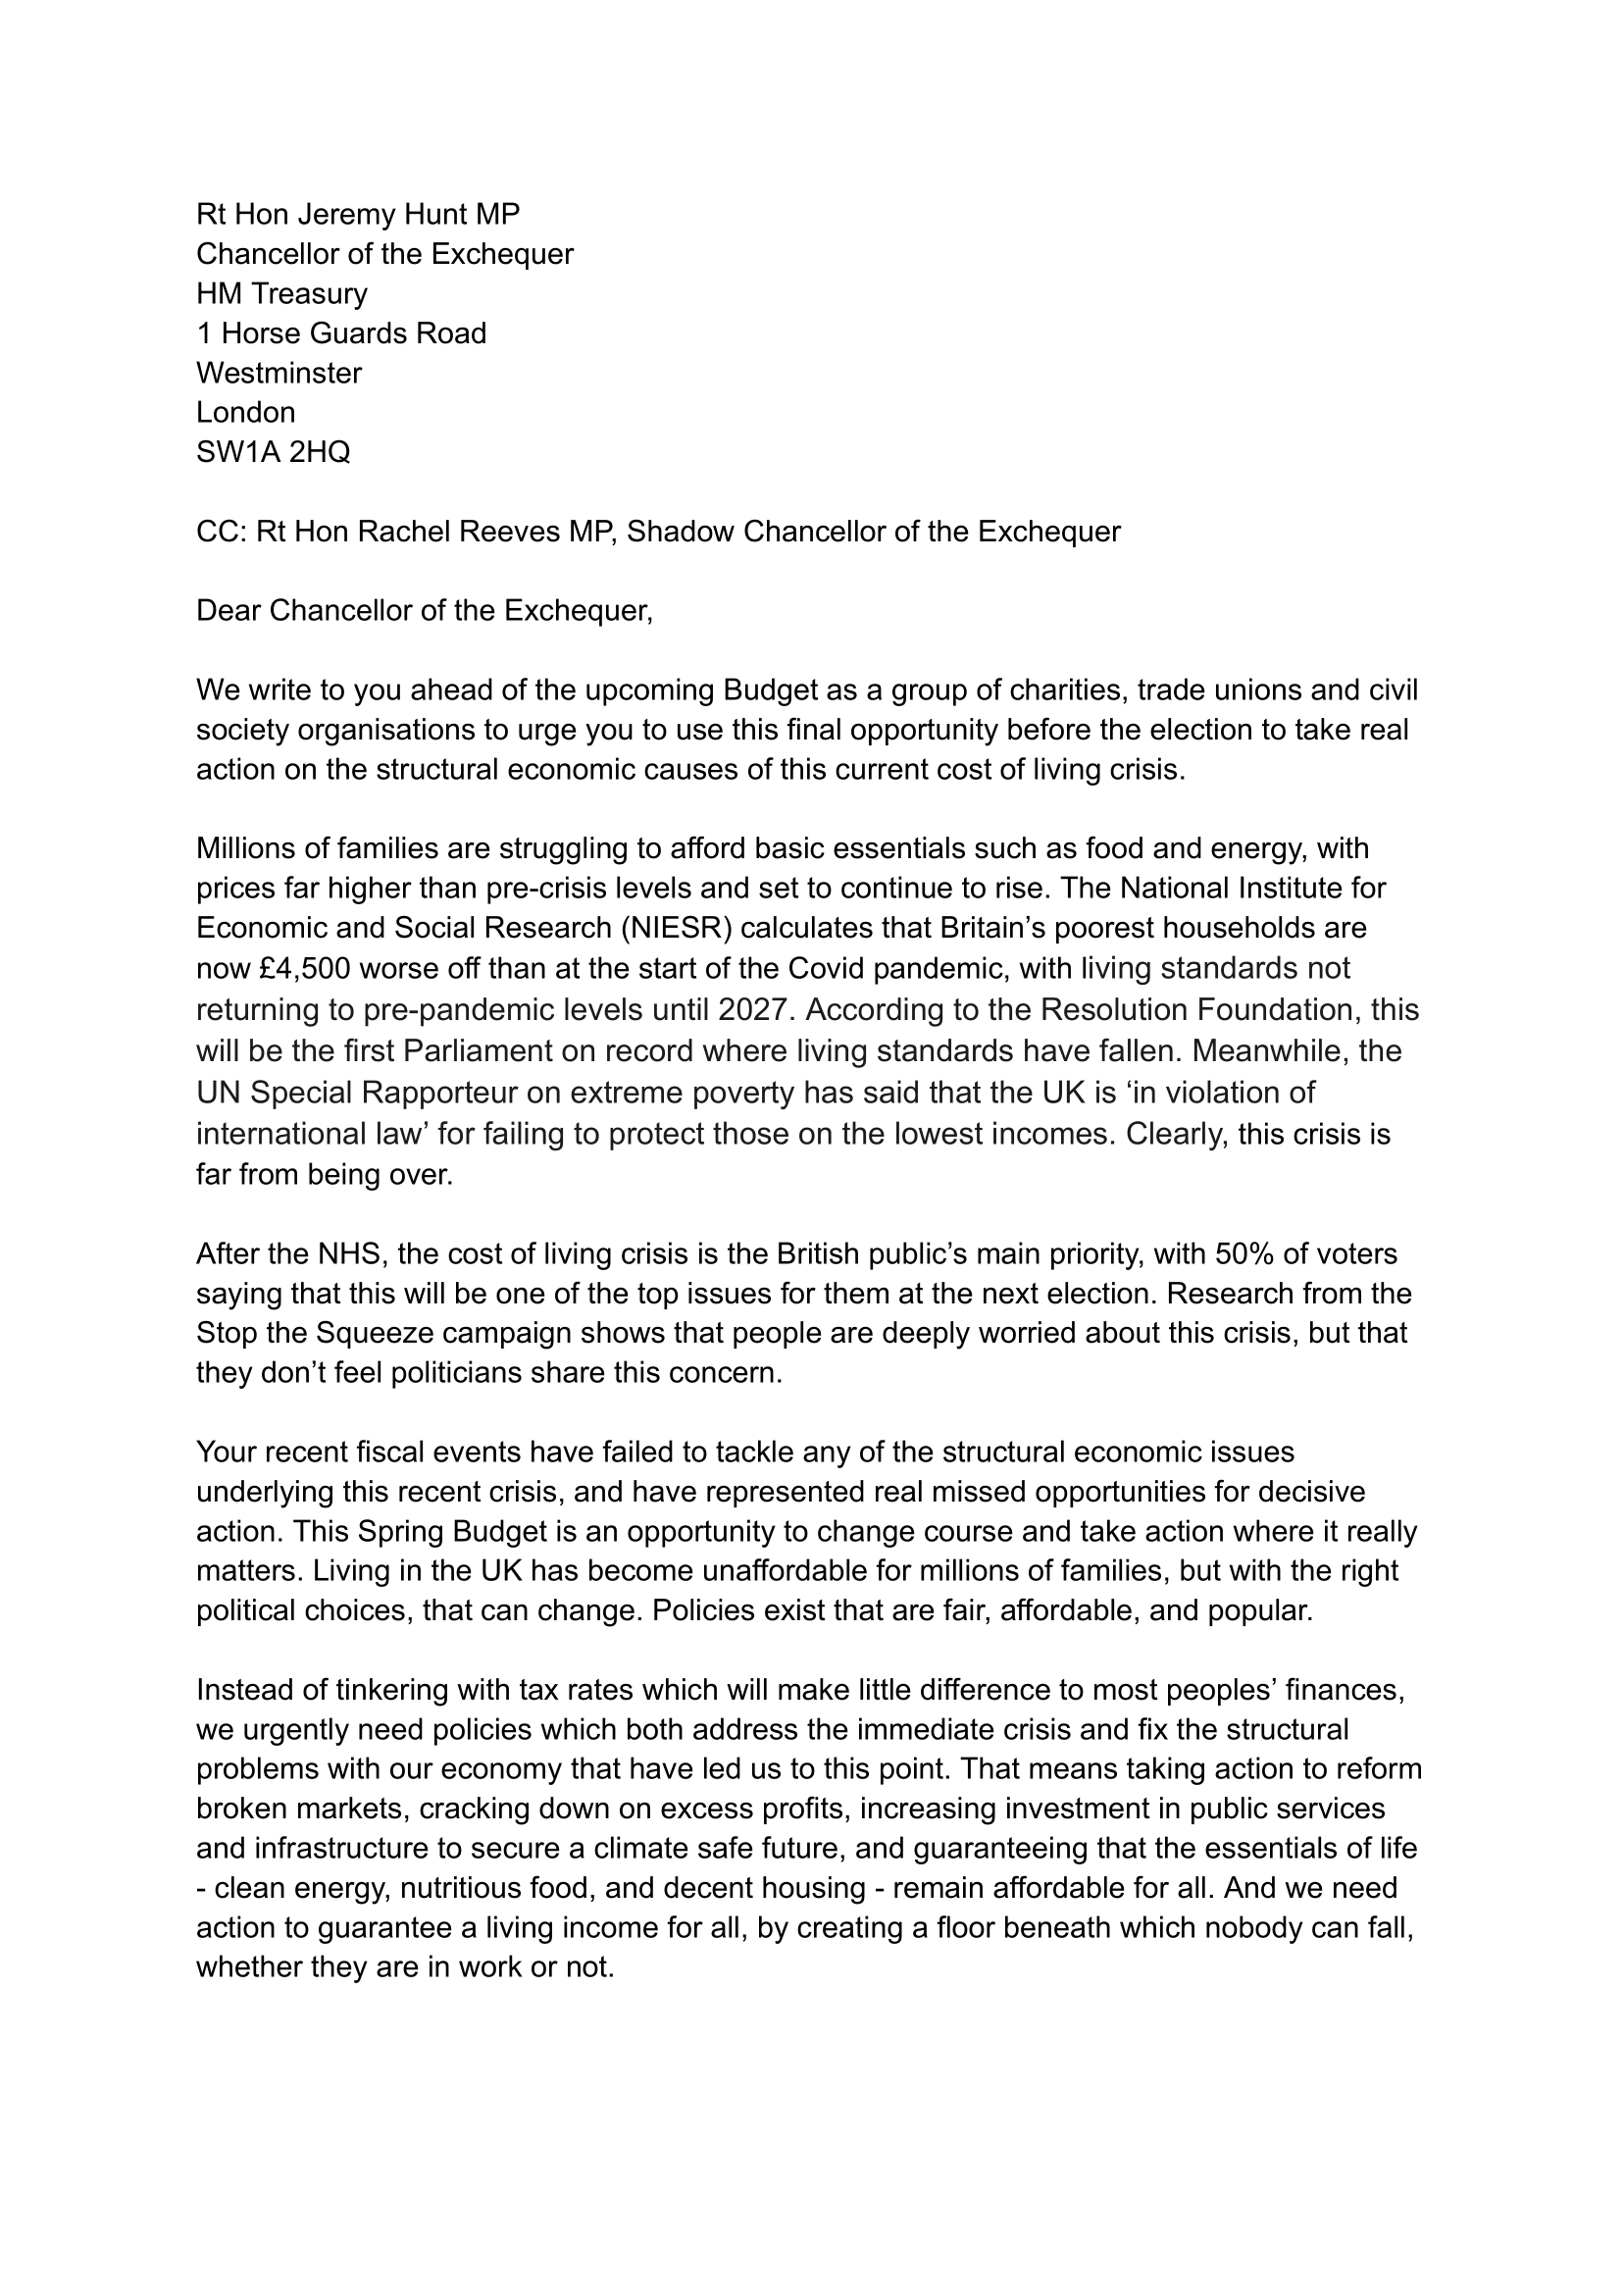 STS letter to Chancellor-1.png